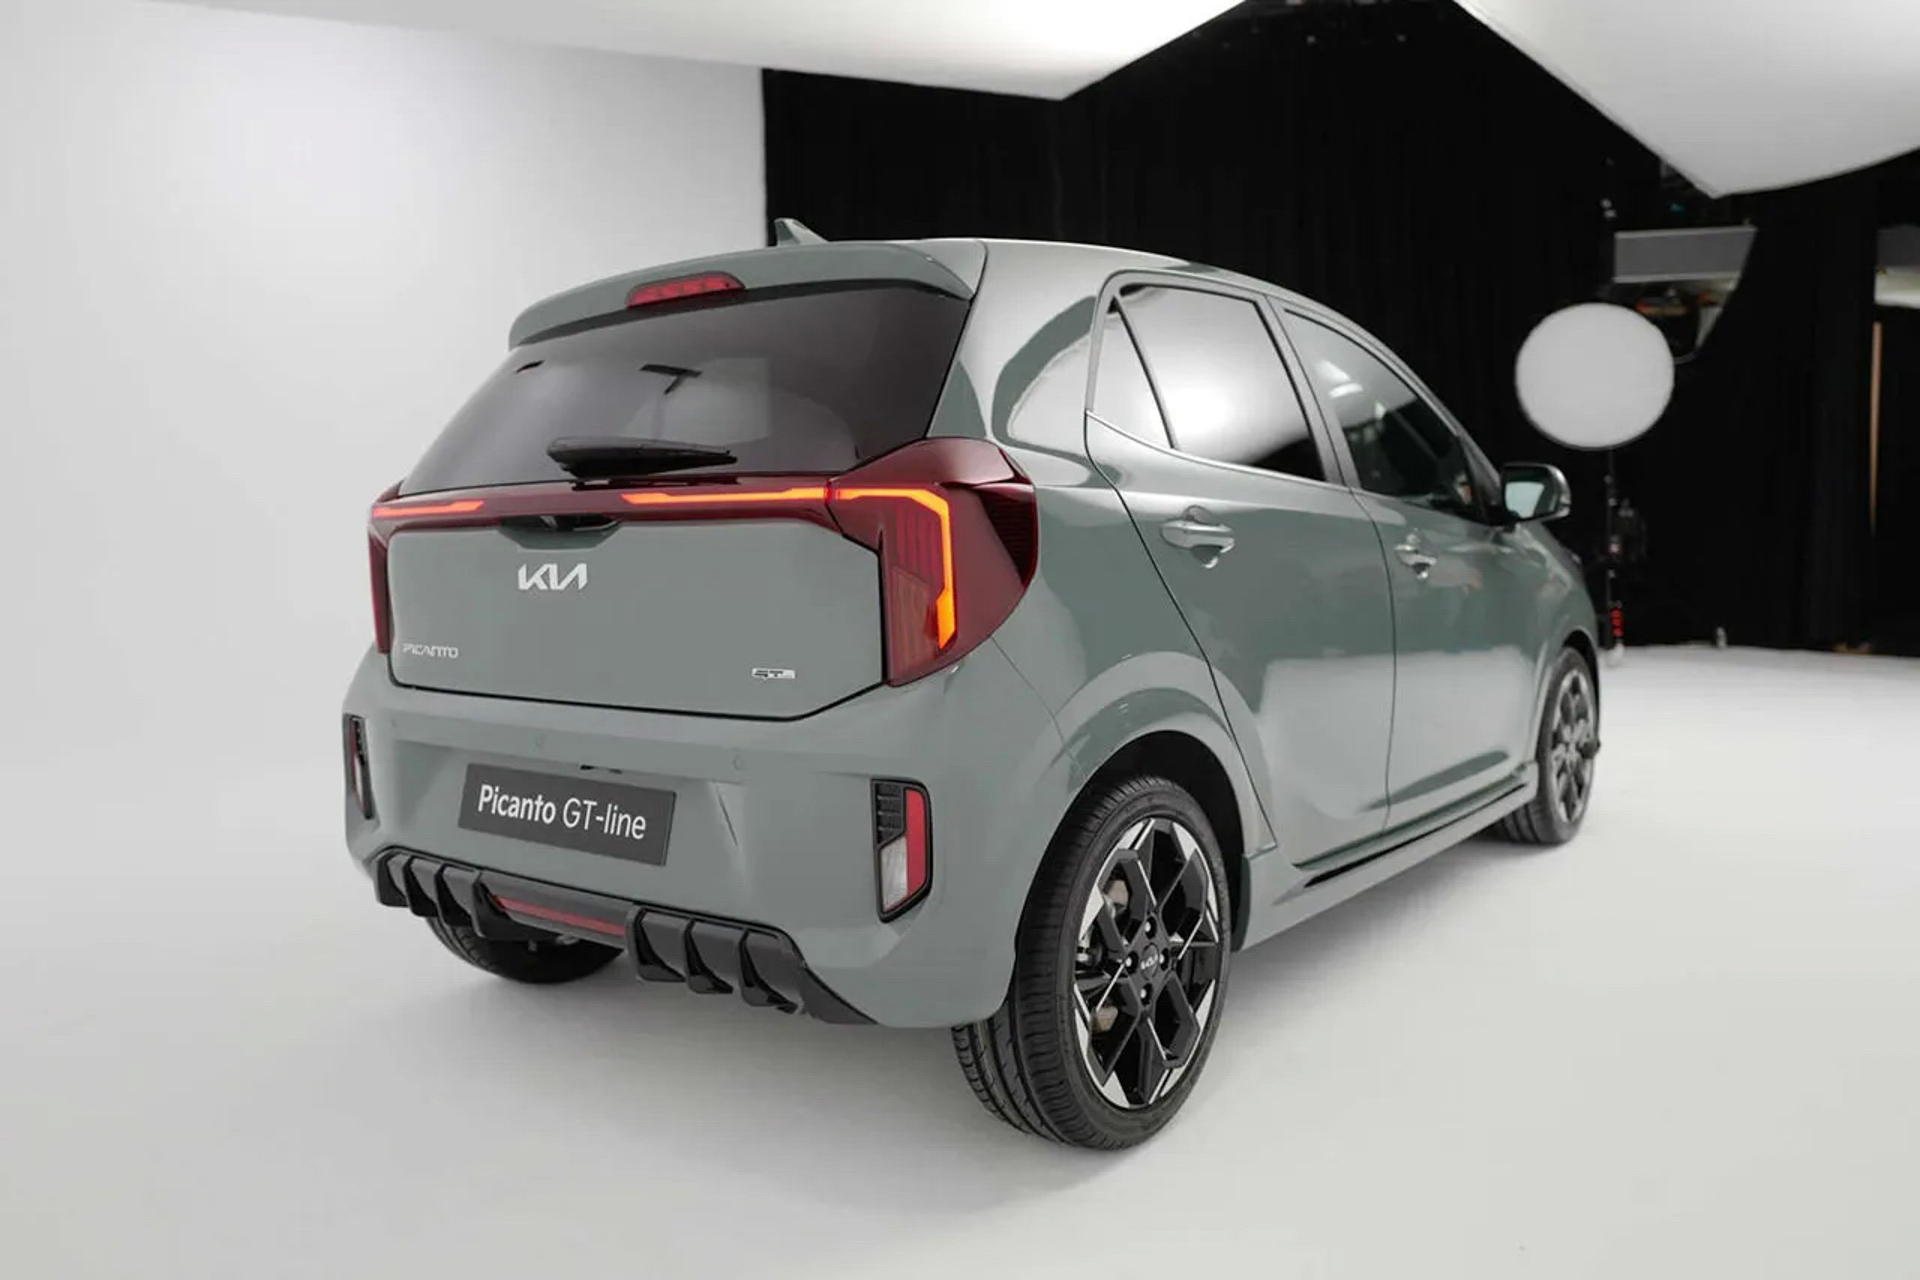 Kia Picanto Photos, Images and Pictures